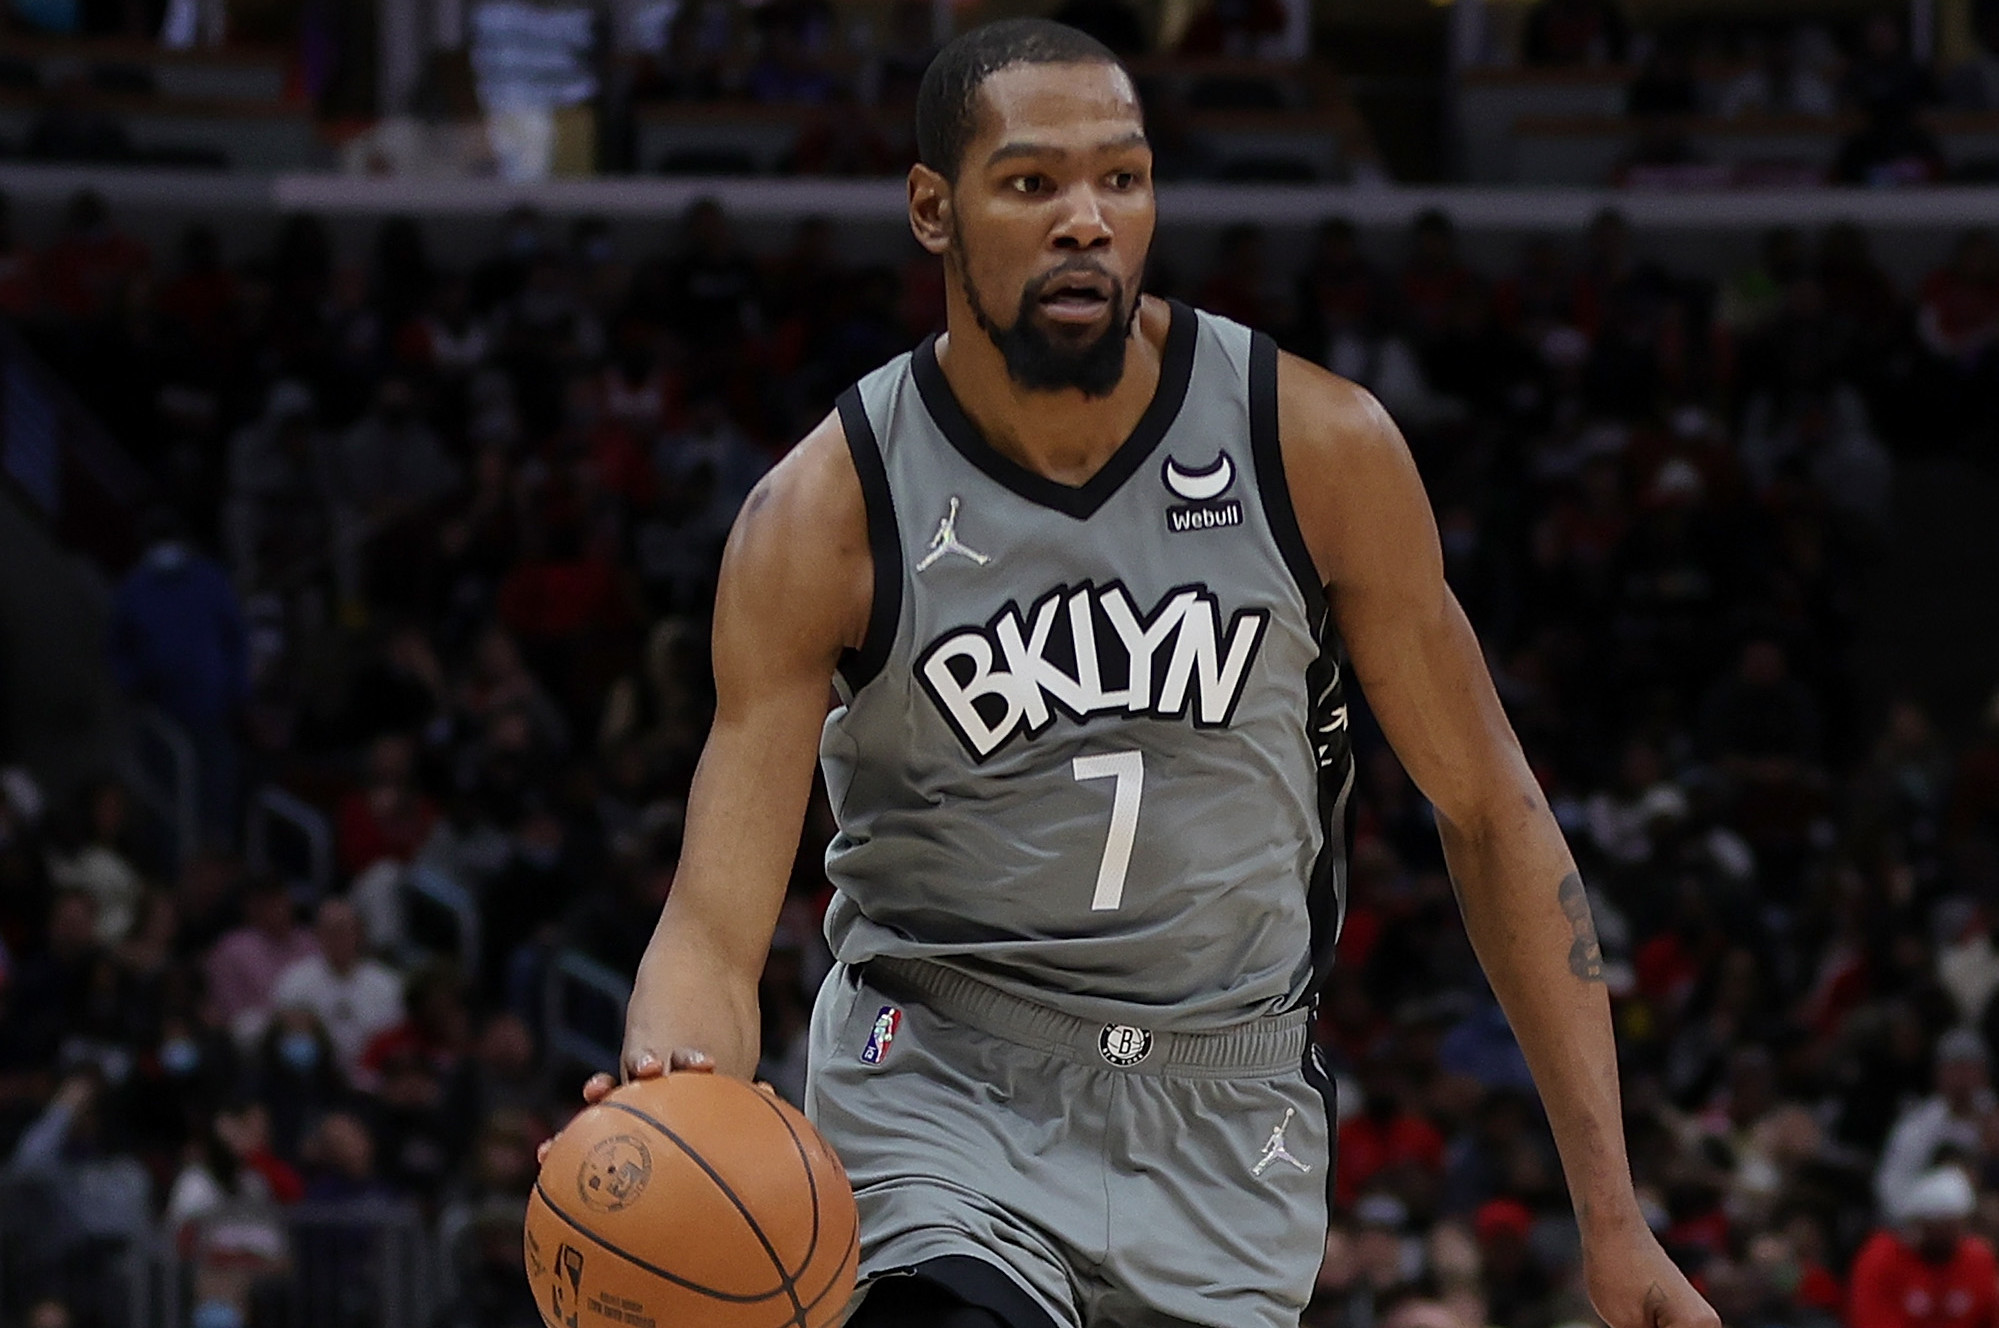 Nets' Kevin Durant Expected to Return from Knee Injury Within 'The Next Week'